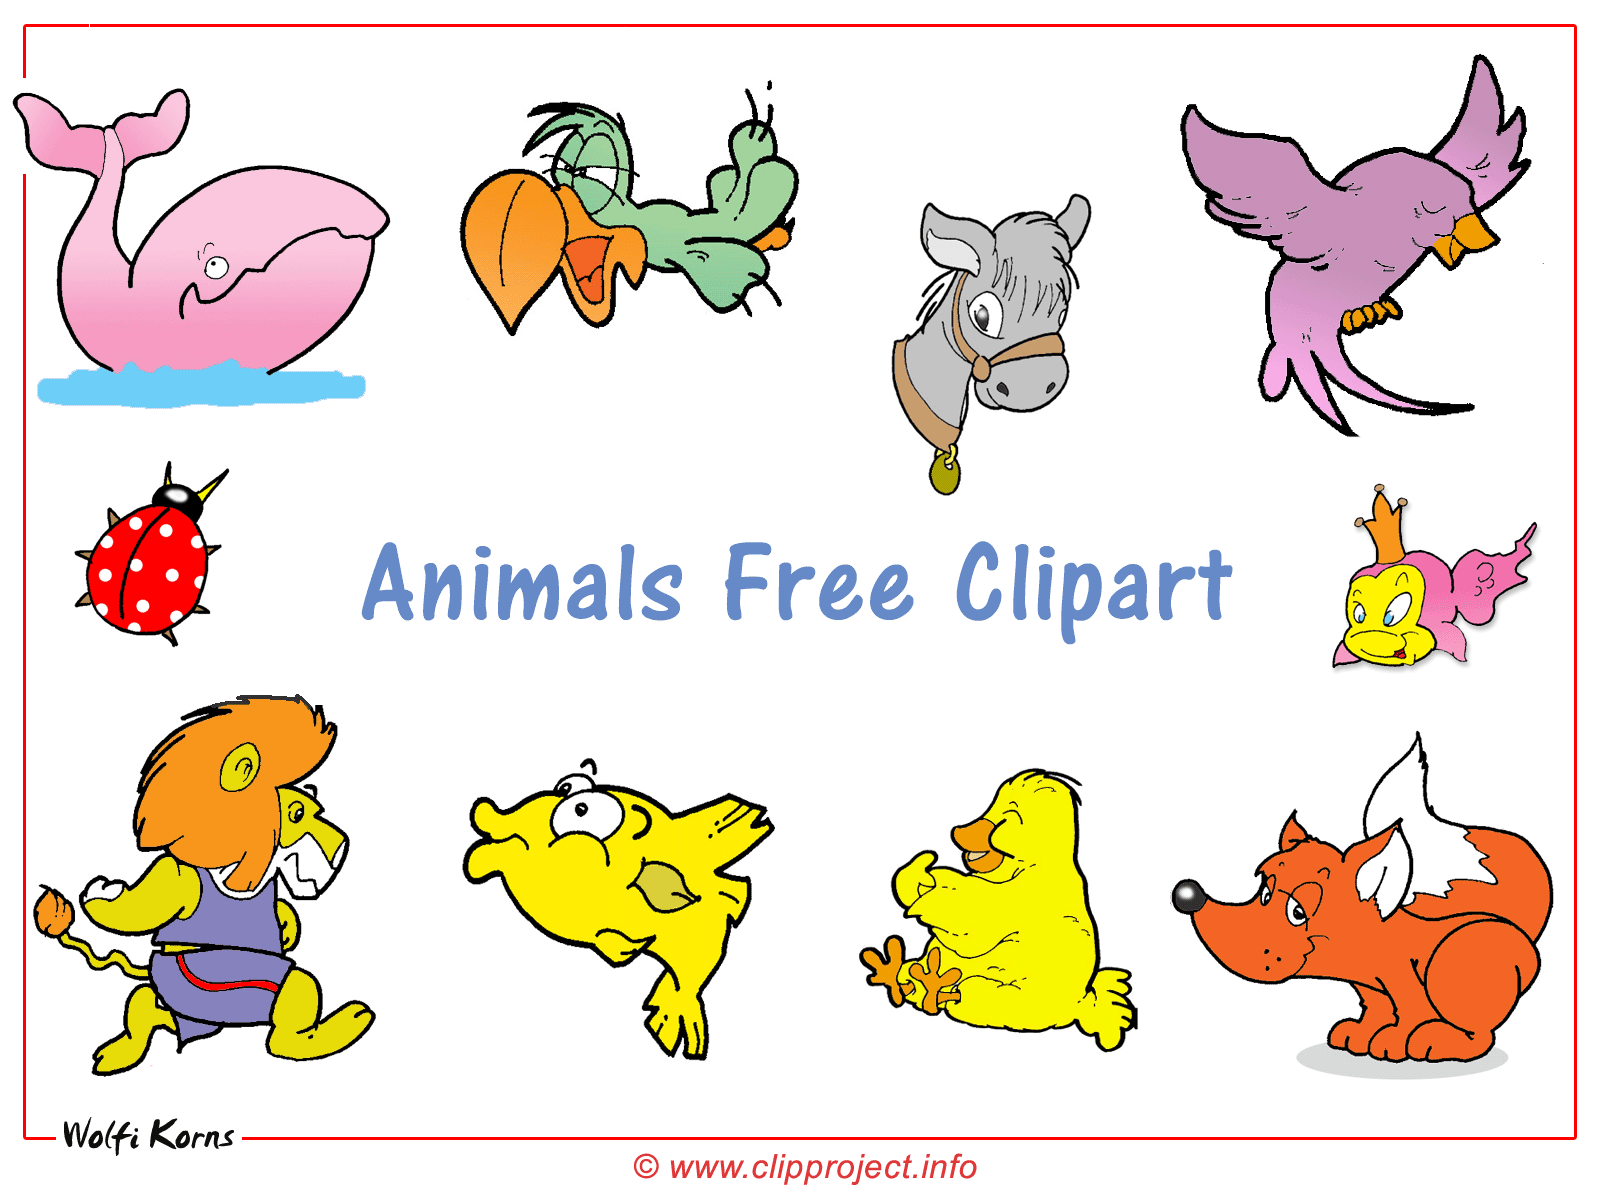 Microsoft clipart gallery fre - Microsoft Clipart Gallery Free